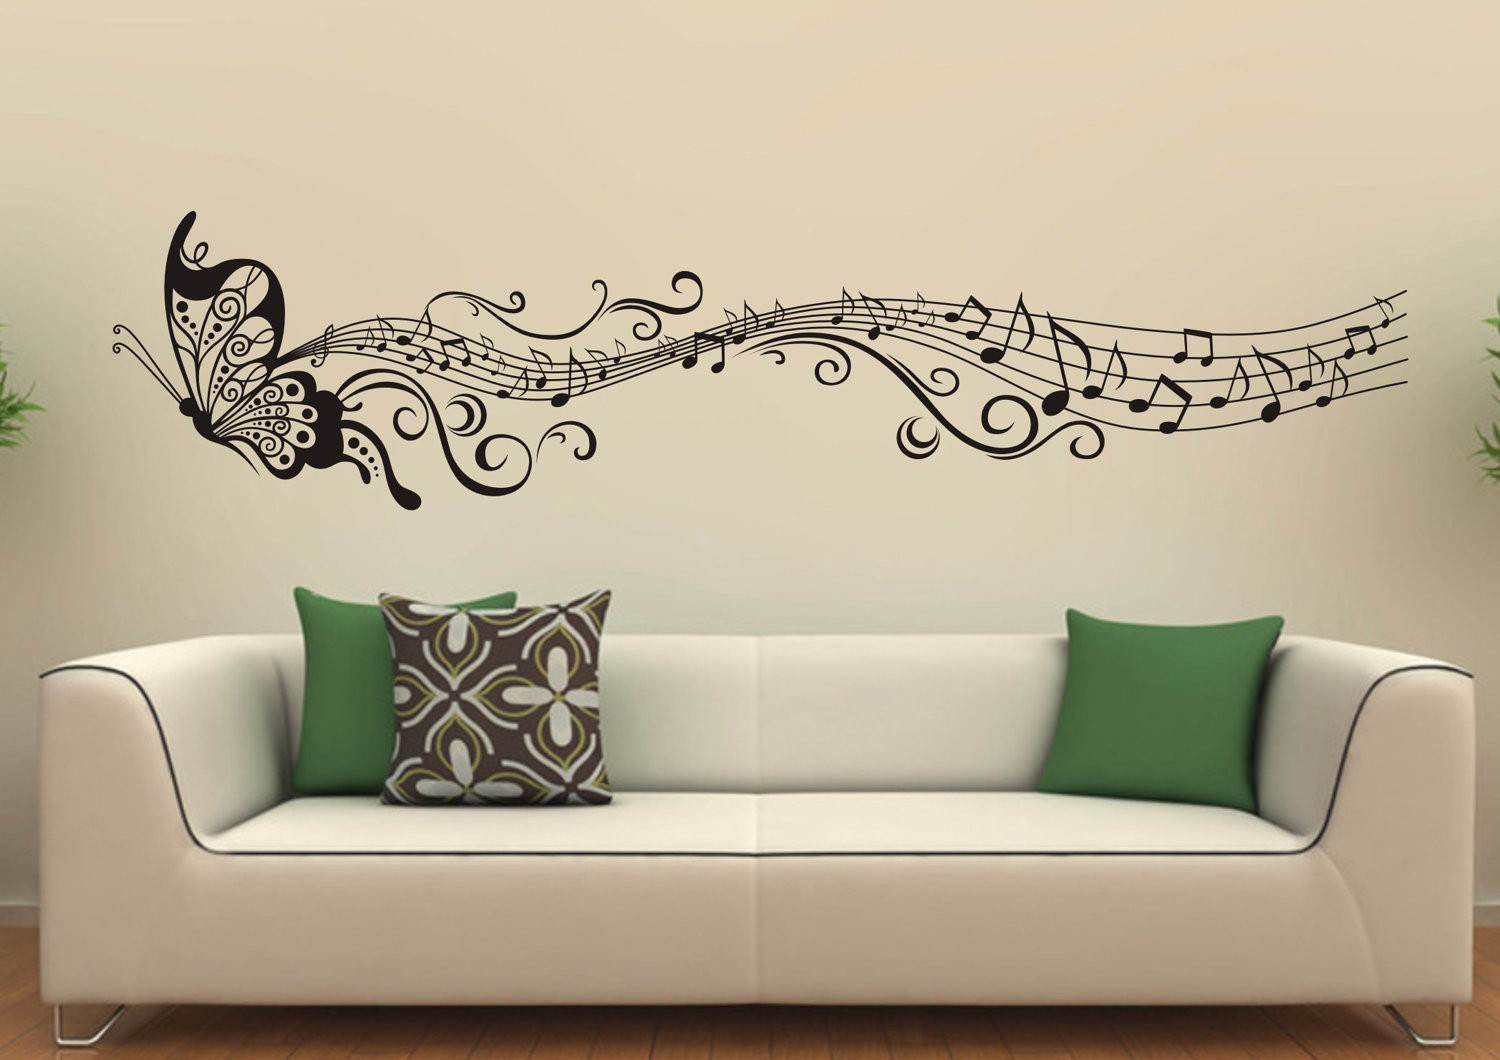 Living Room Wall Decal
 Wall Decoration